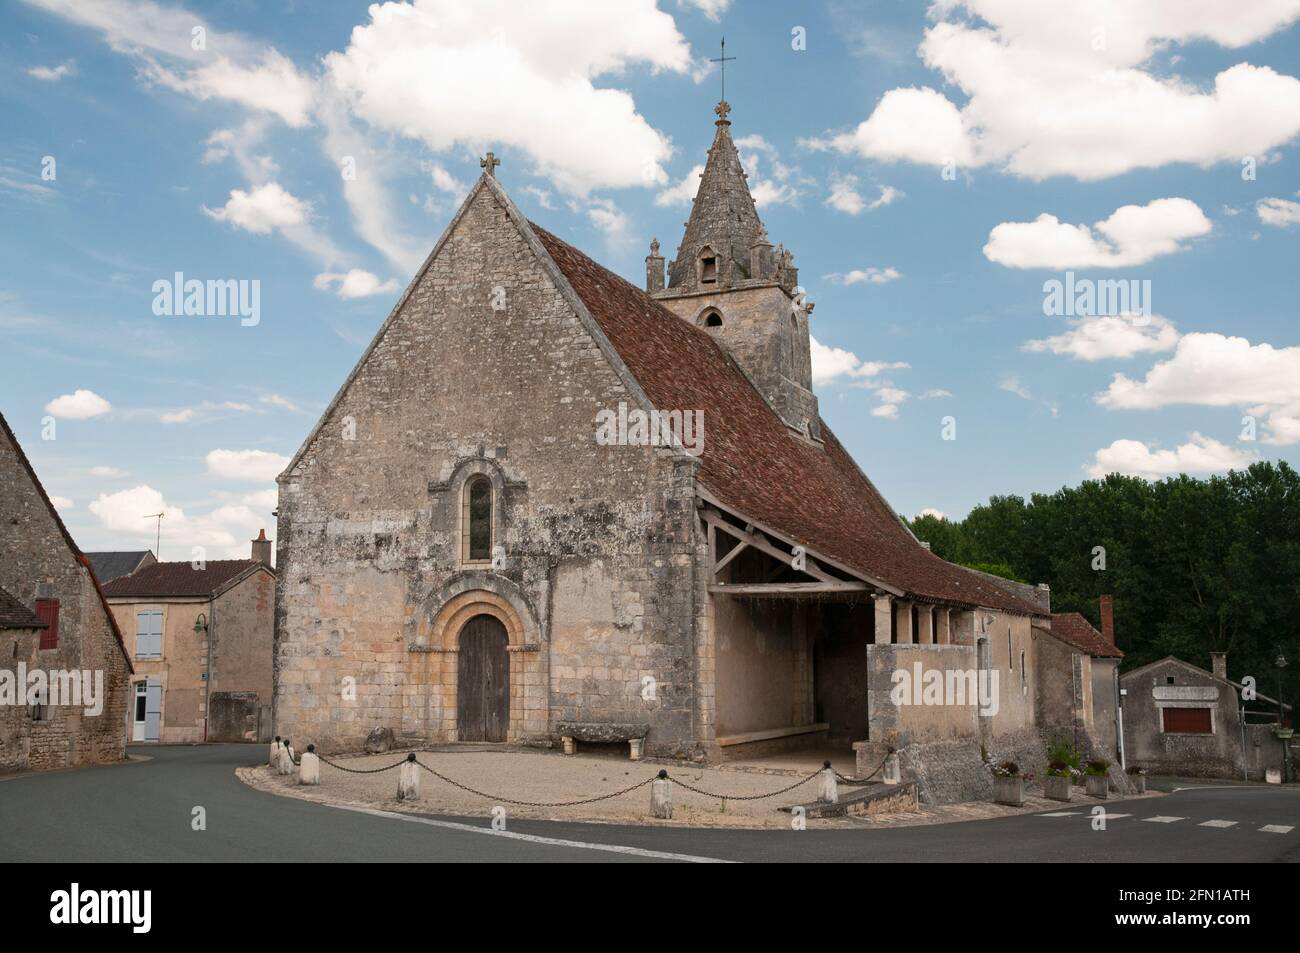 Roman church of Notre-Dame, Antigny, Vienne (86), Nouvelle-Aquitaine region, France. It is a listed historic monument. Stock Photo